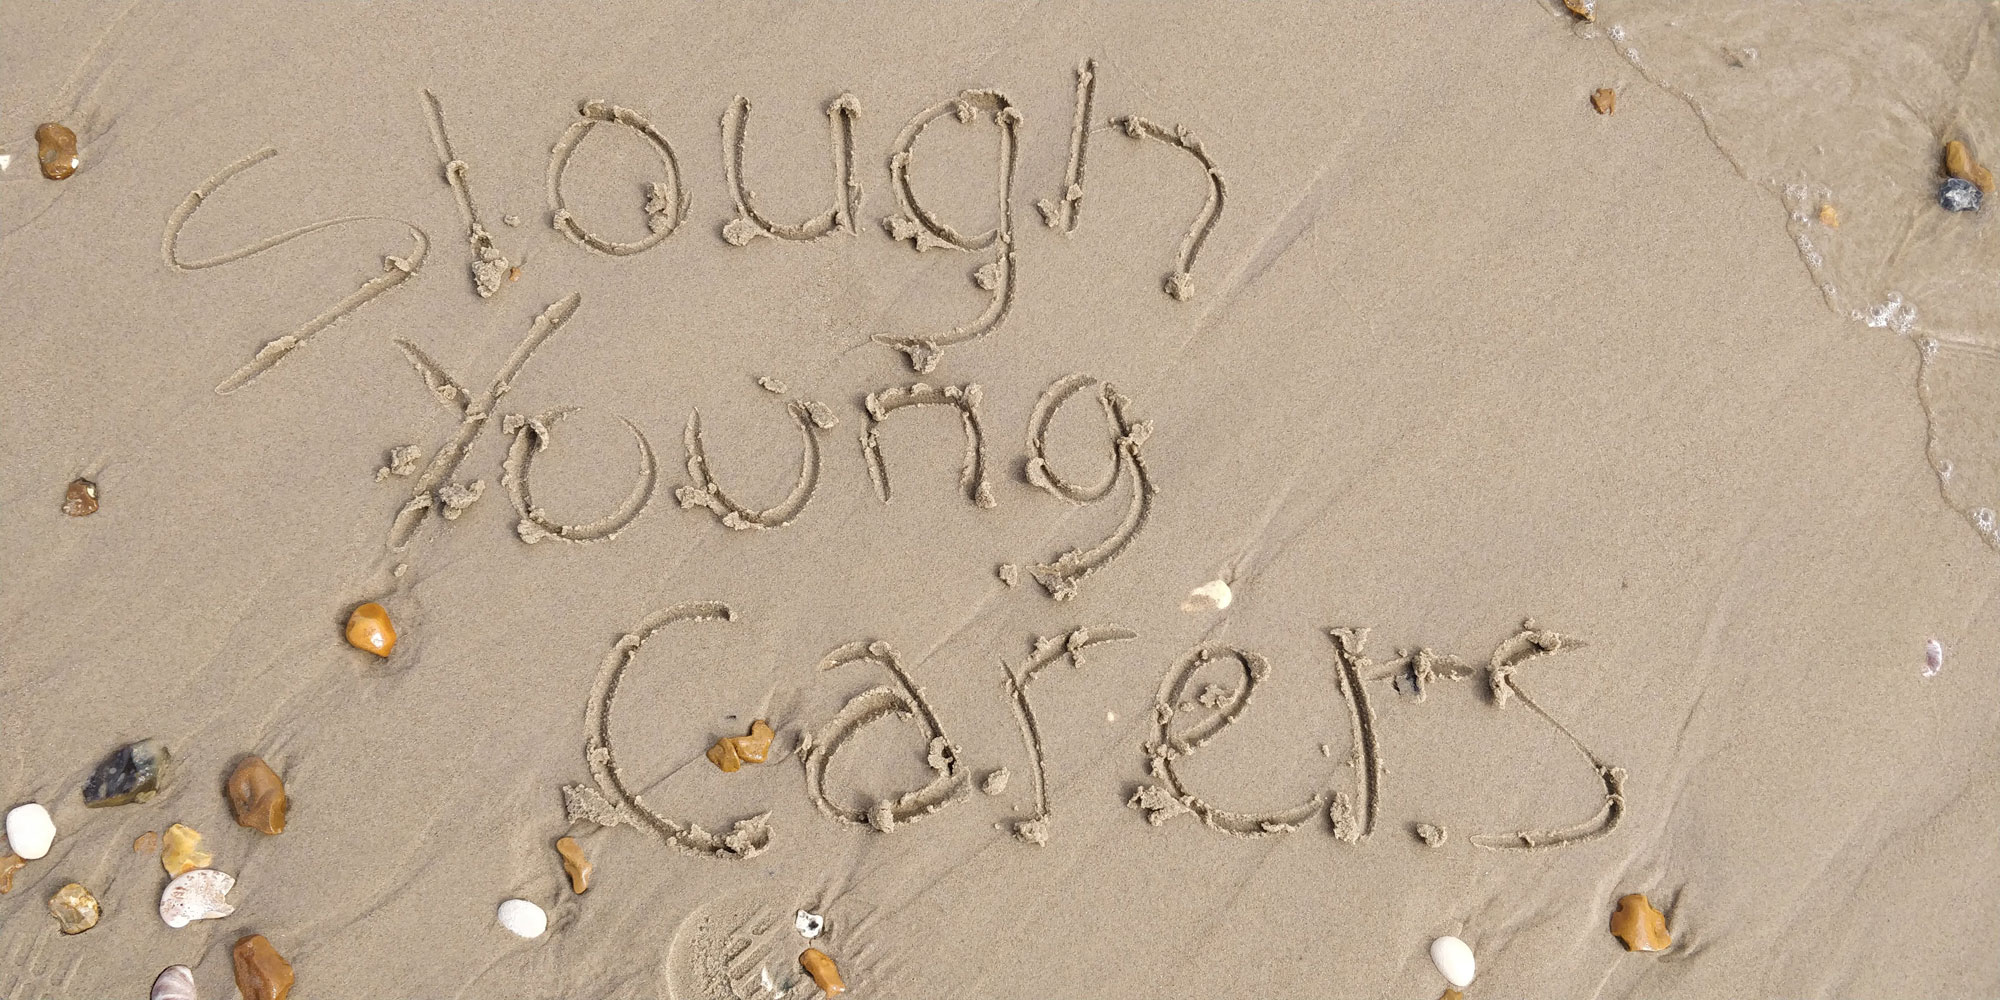 Young carers written in the sand